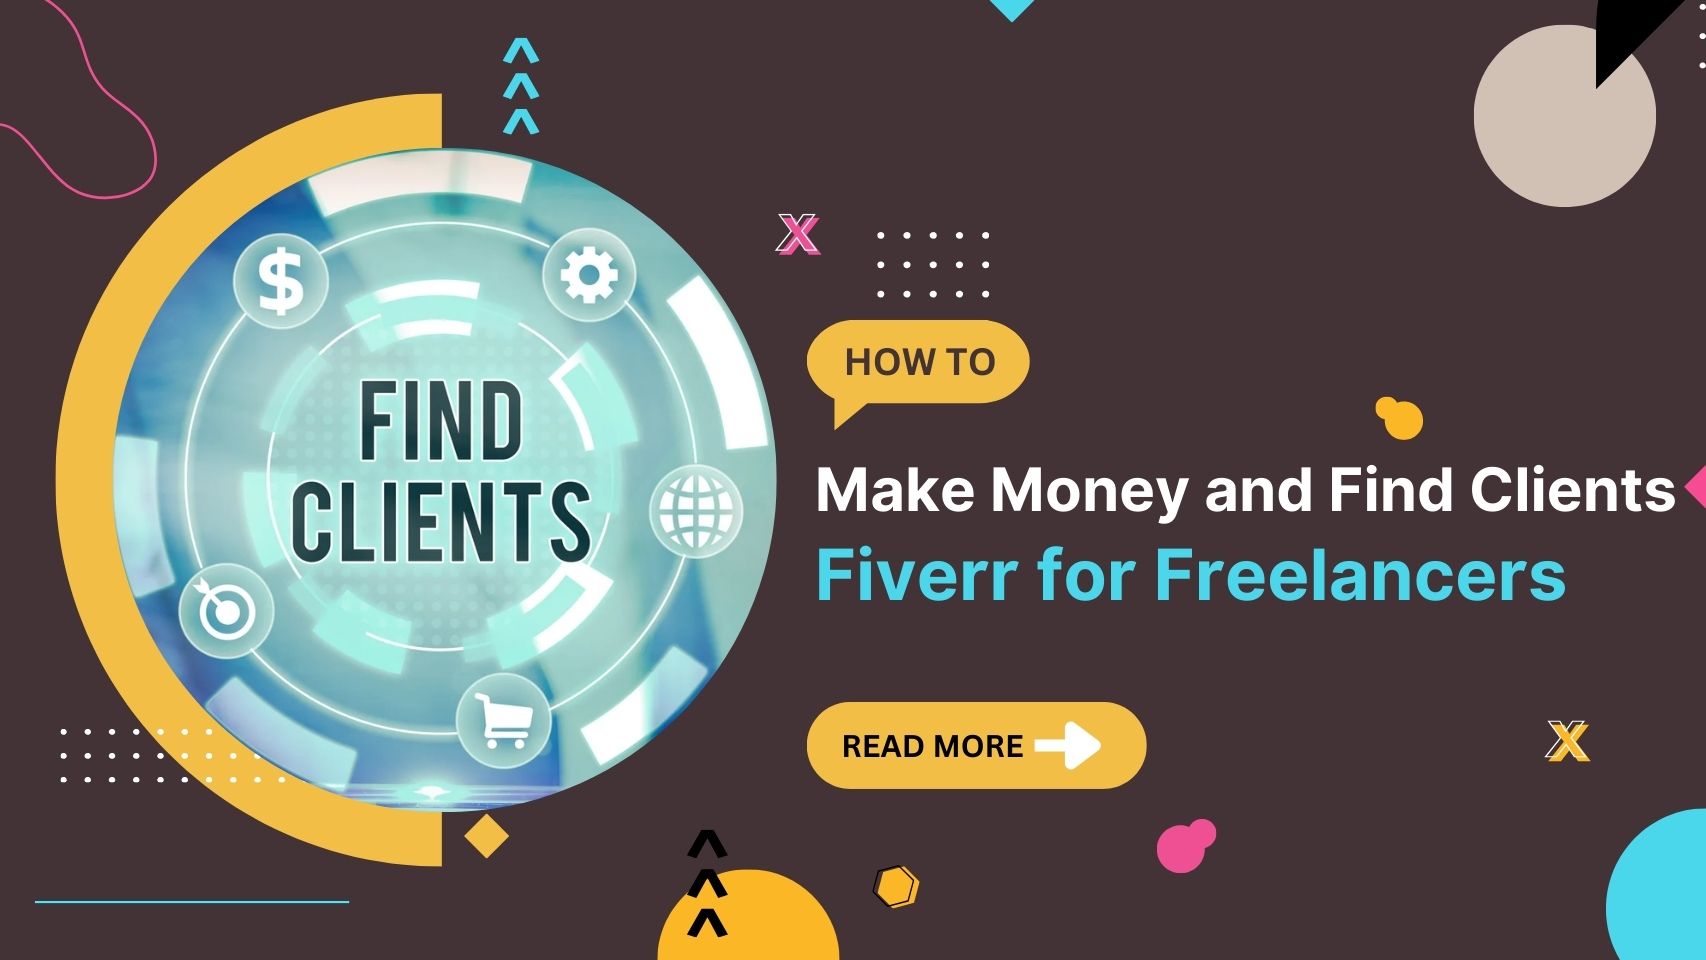 Fiverr for Freelancers: How to Make Money and Find Clients